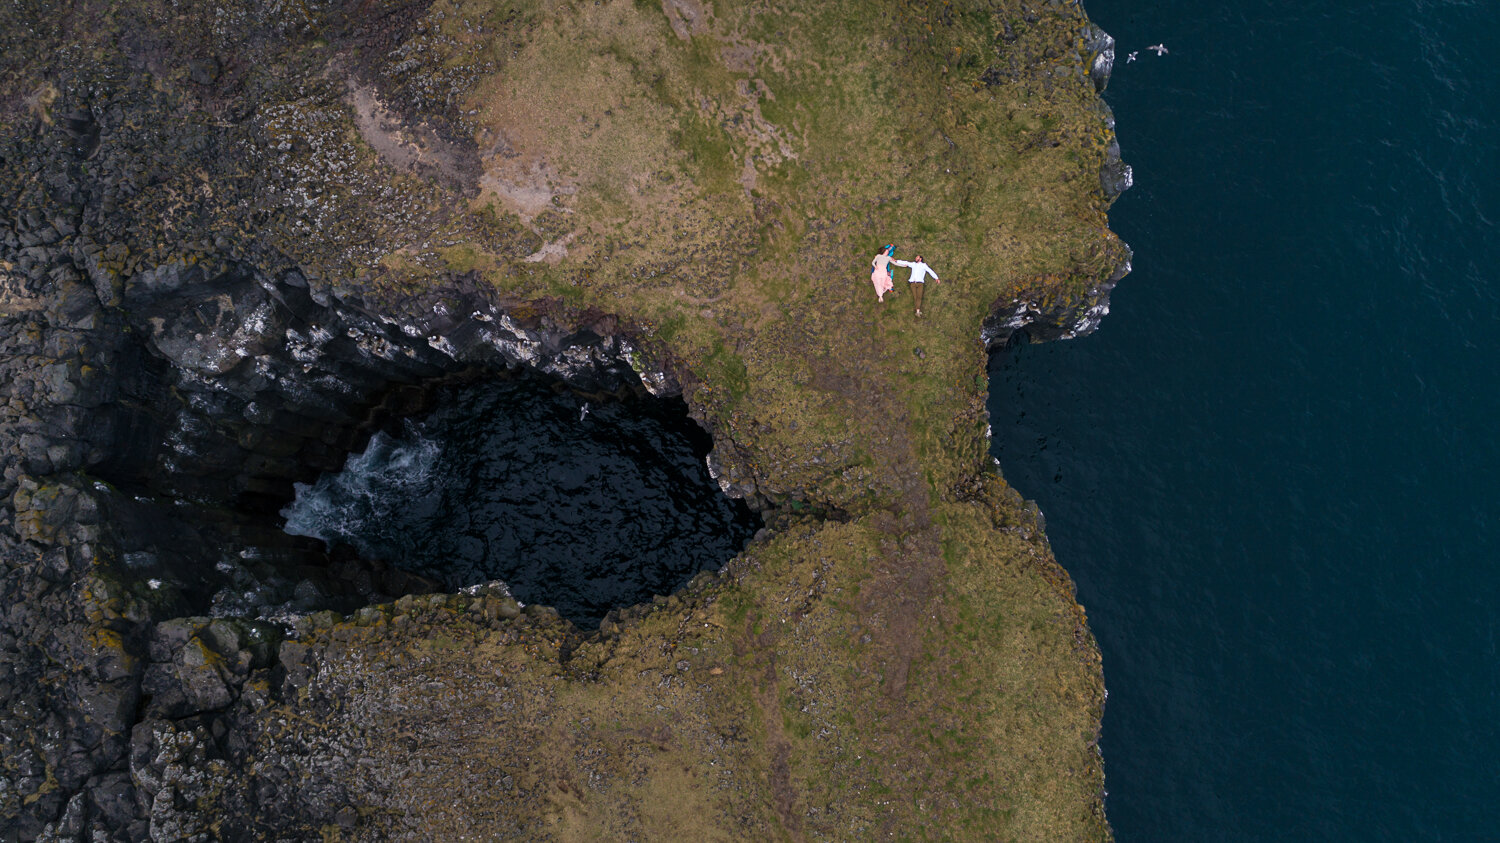 Iceland elopement photographer. Drone elopement photography of a couple on rock arch bridge over ocean at Arnarstapi in Iceland.